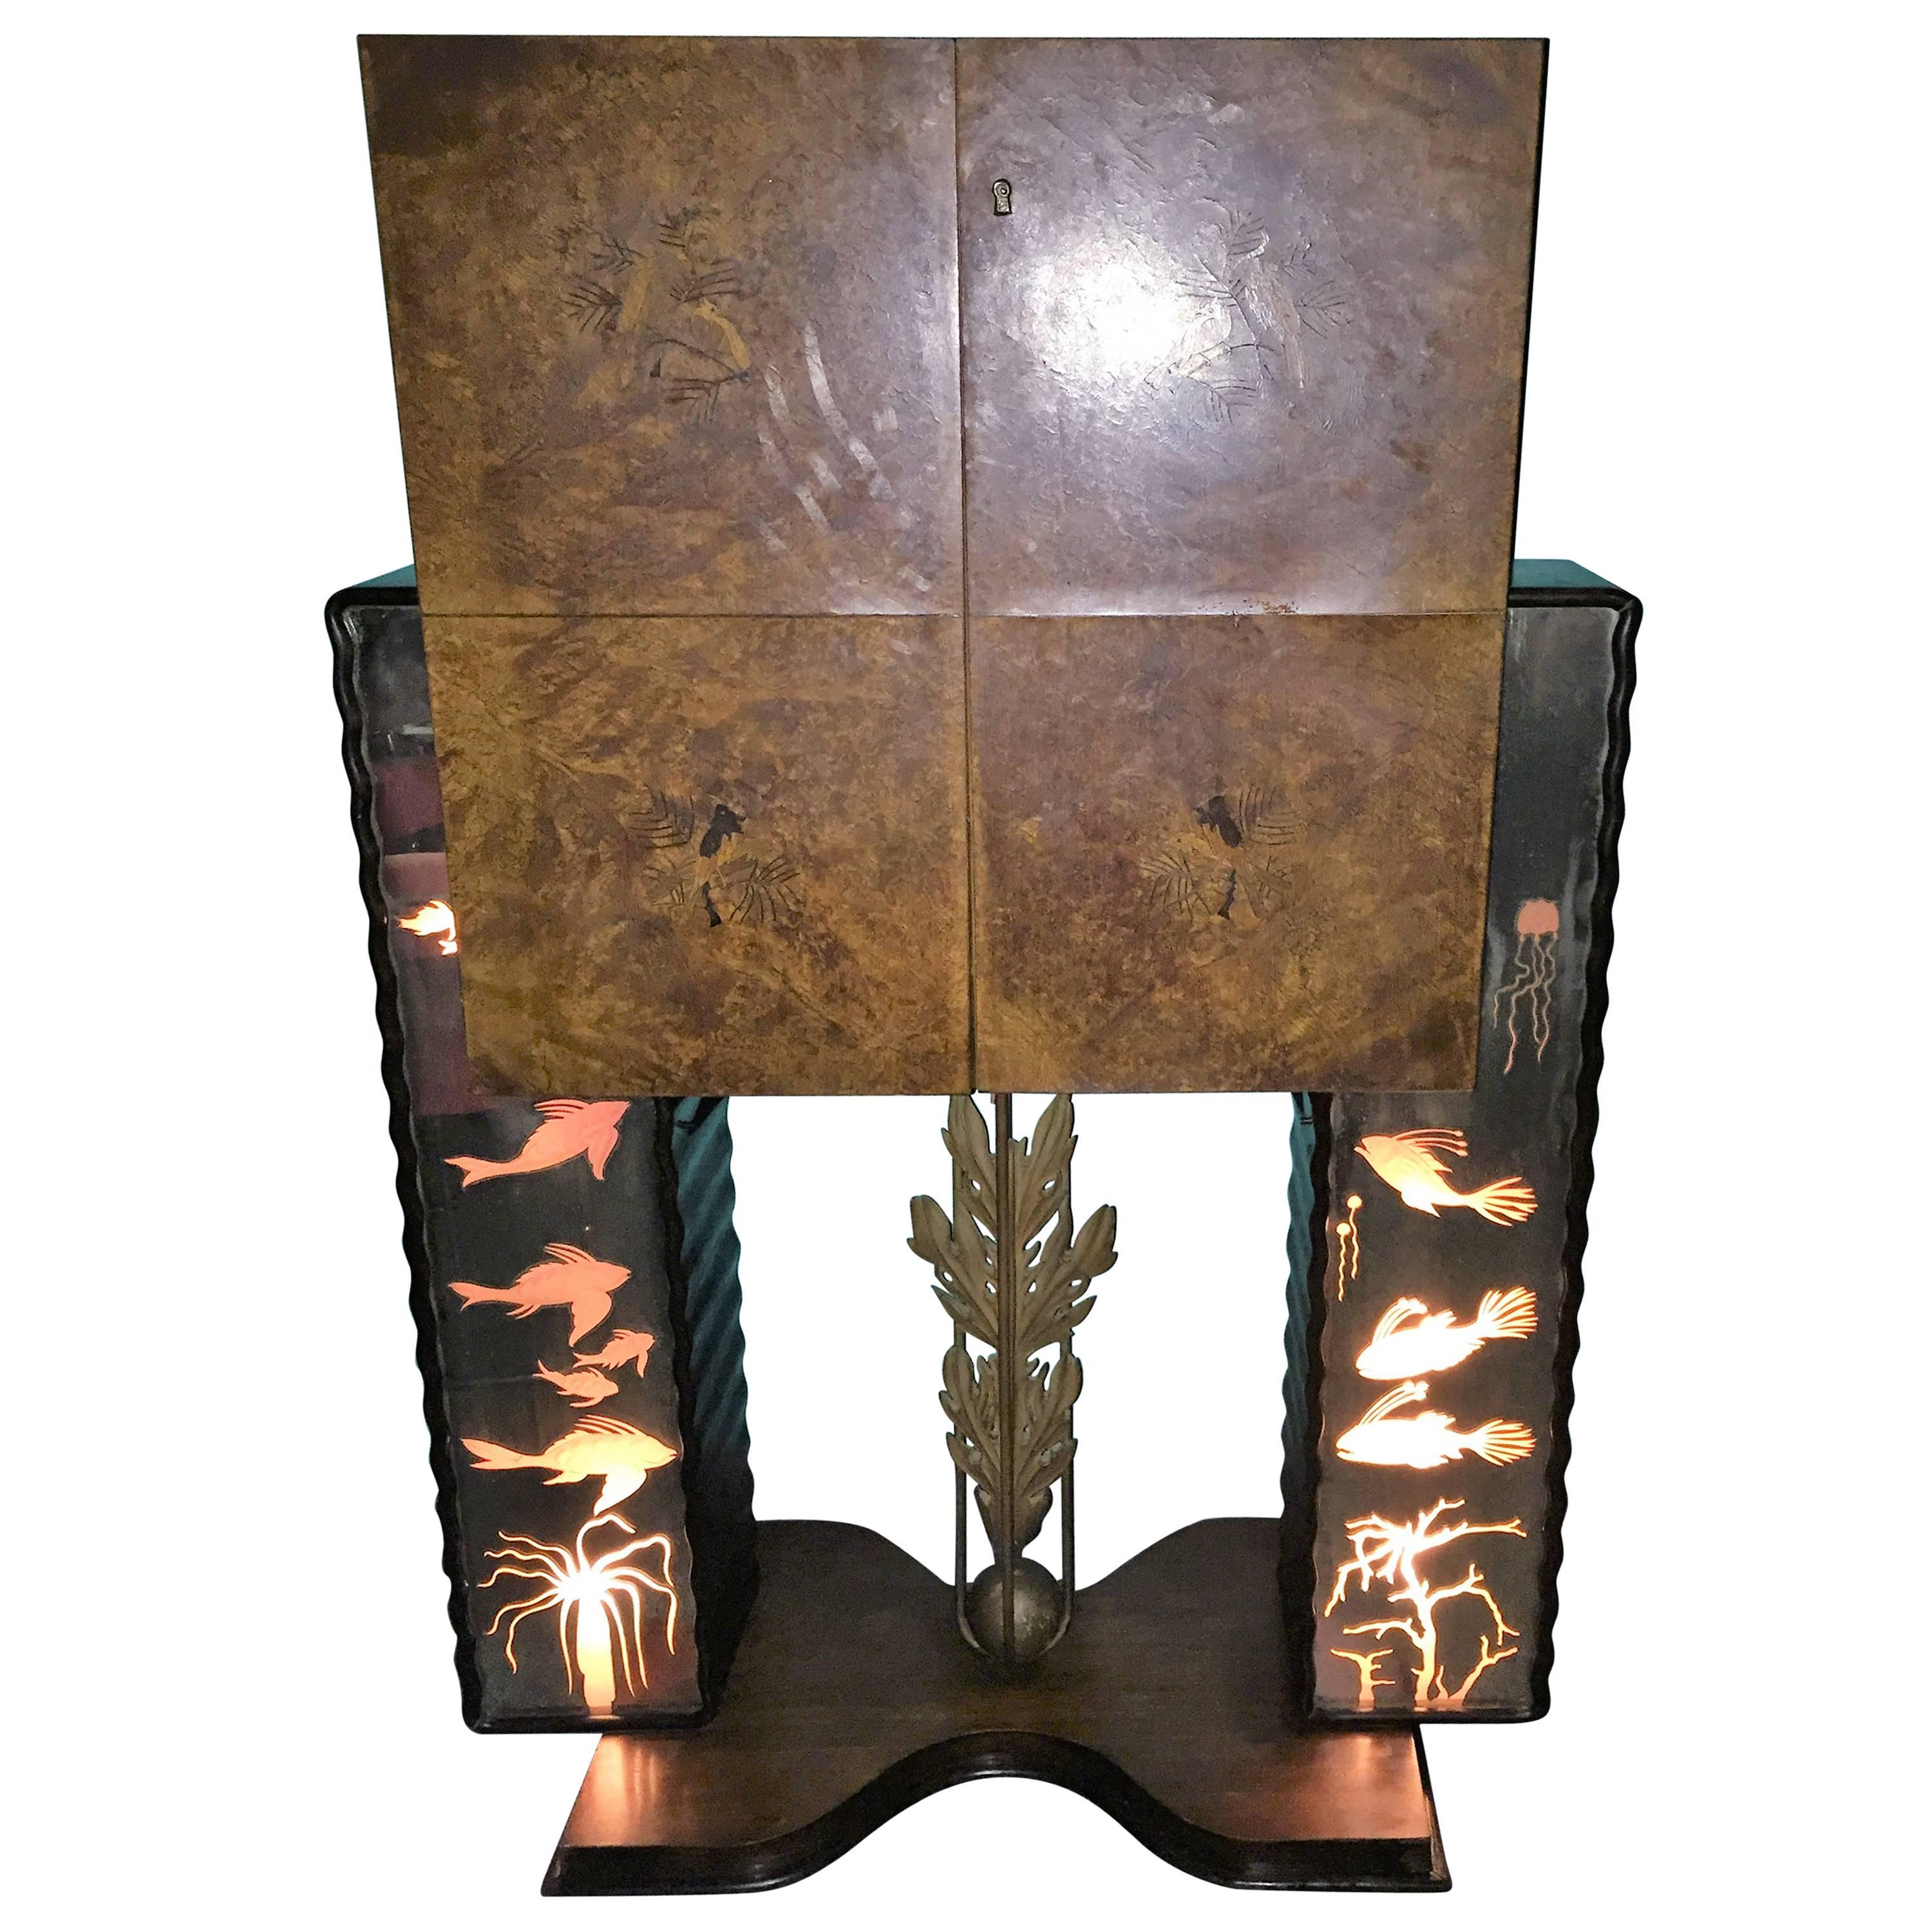 A fantastic ethereal Italian bar with illuminated mirrored panels exhibiting mysterious sea life with two push in switches located on the sides. In the center of these panels is a hand-carved wooden ball and coral motif surrounded by metal tendrils.